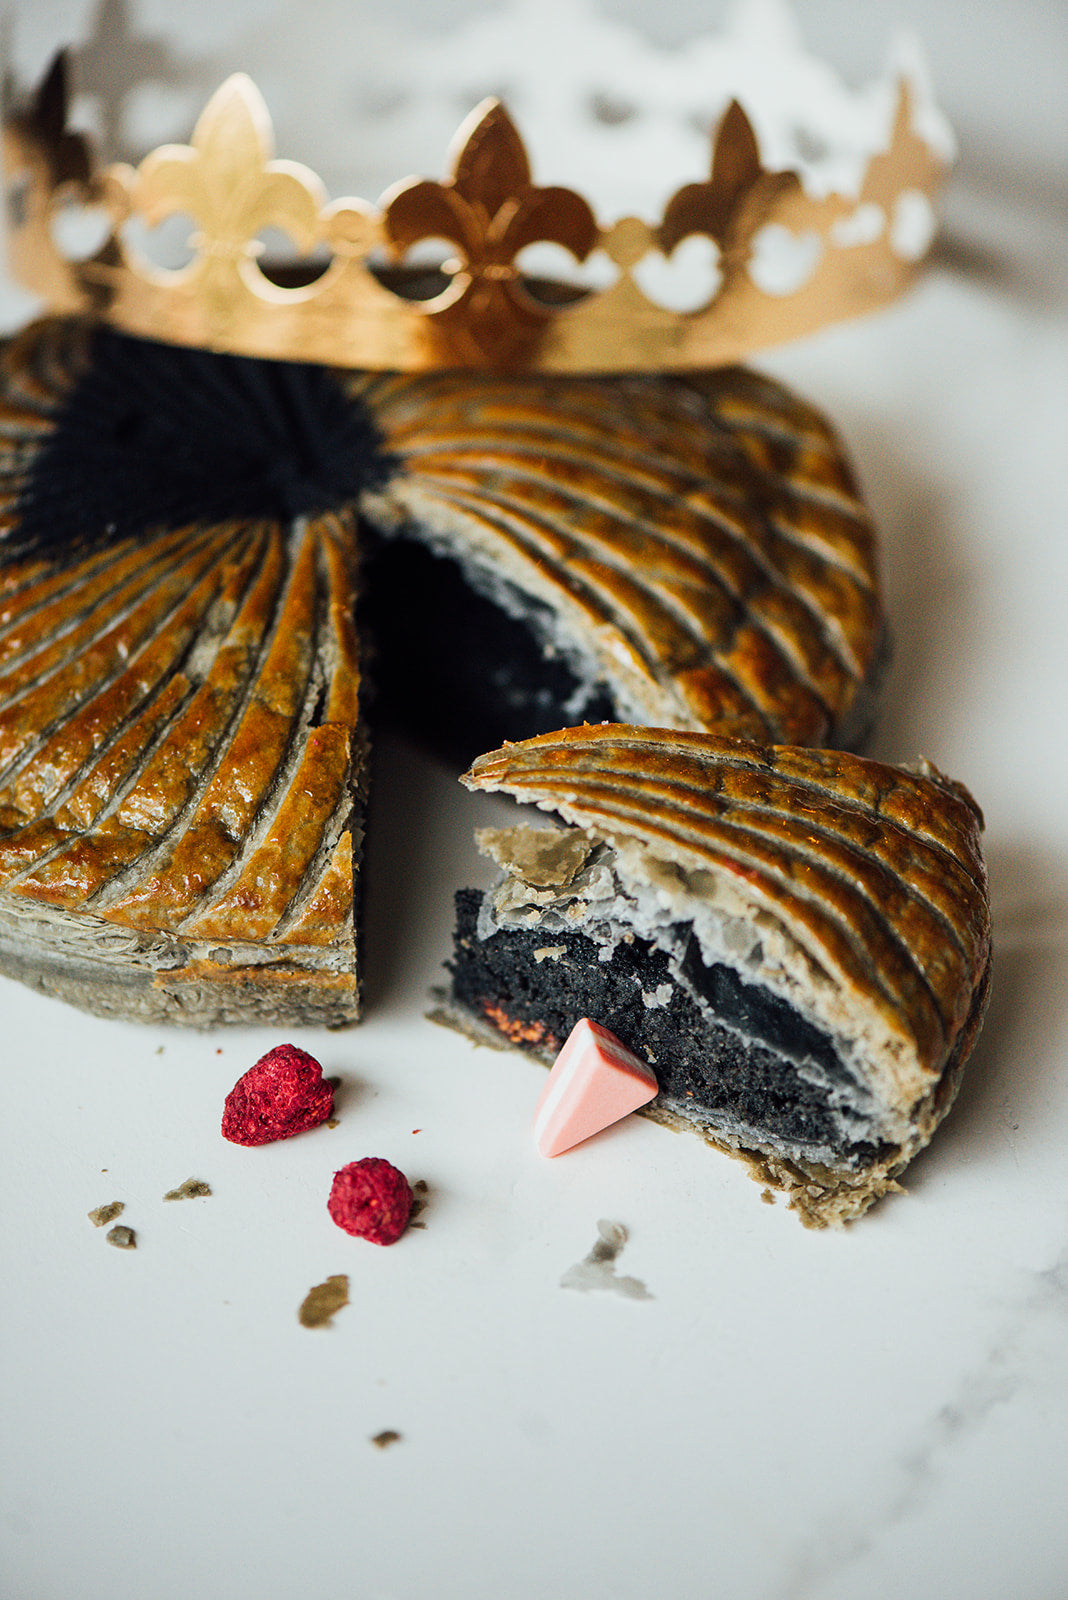 Black sesame and raspberry king/queen galette